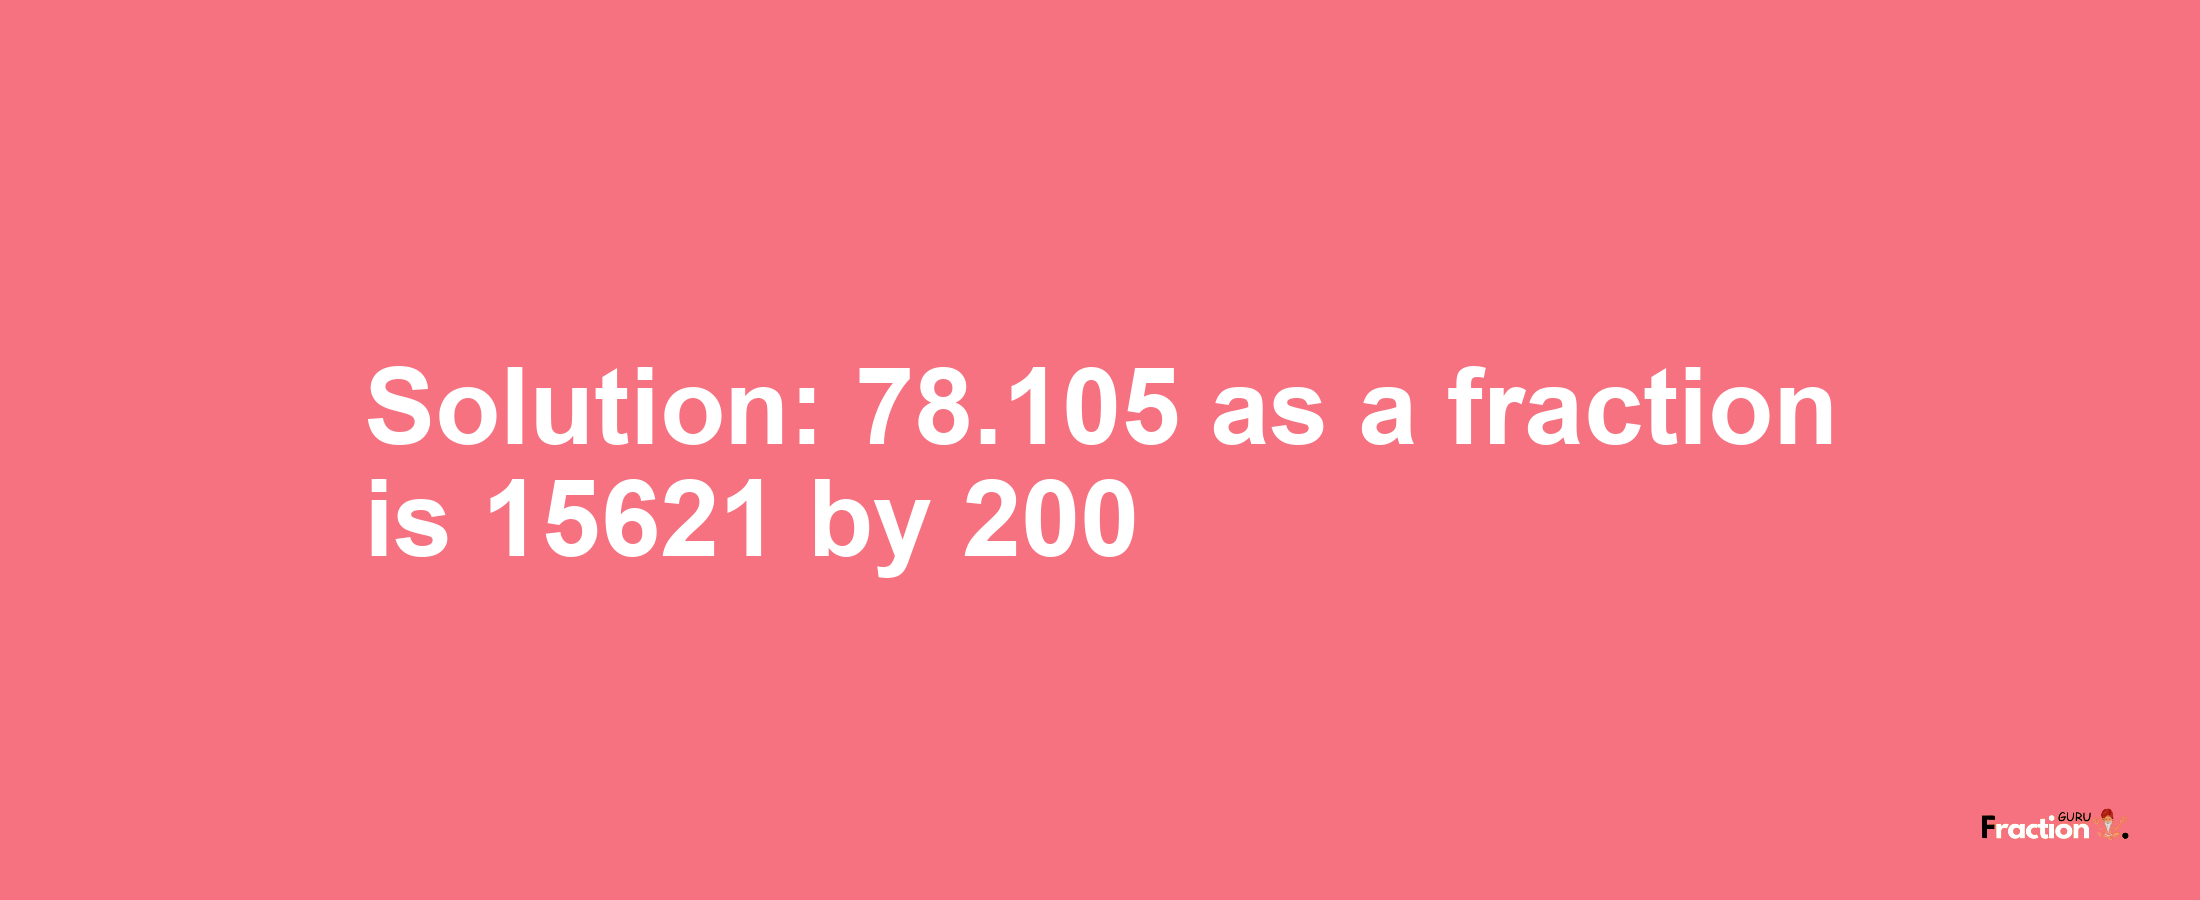 Solution:78.105 as a fraction is 15621/200